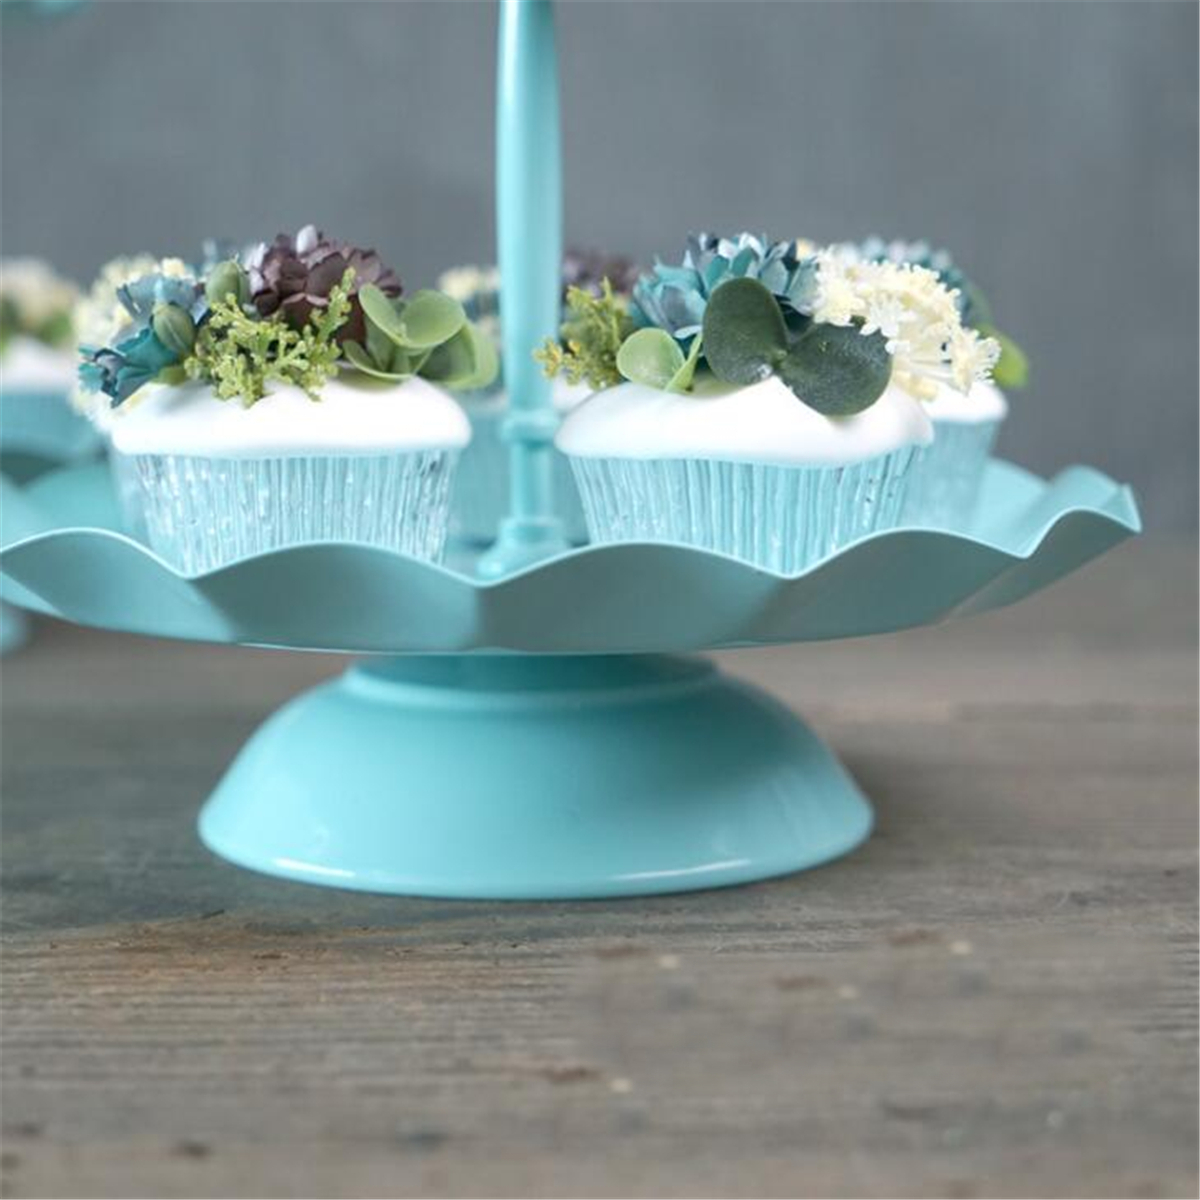 2--3-Ters-Blue-Cake-Holder-Cupcake-Stand-Birthday-Wedding-Party-Display-Holder-Decorations-1340743-5